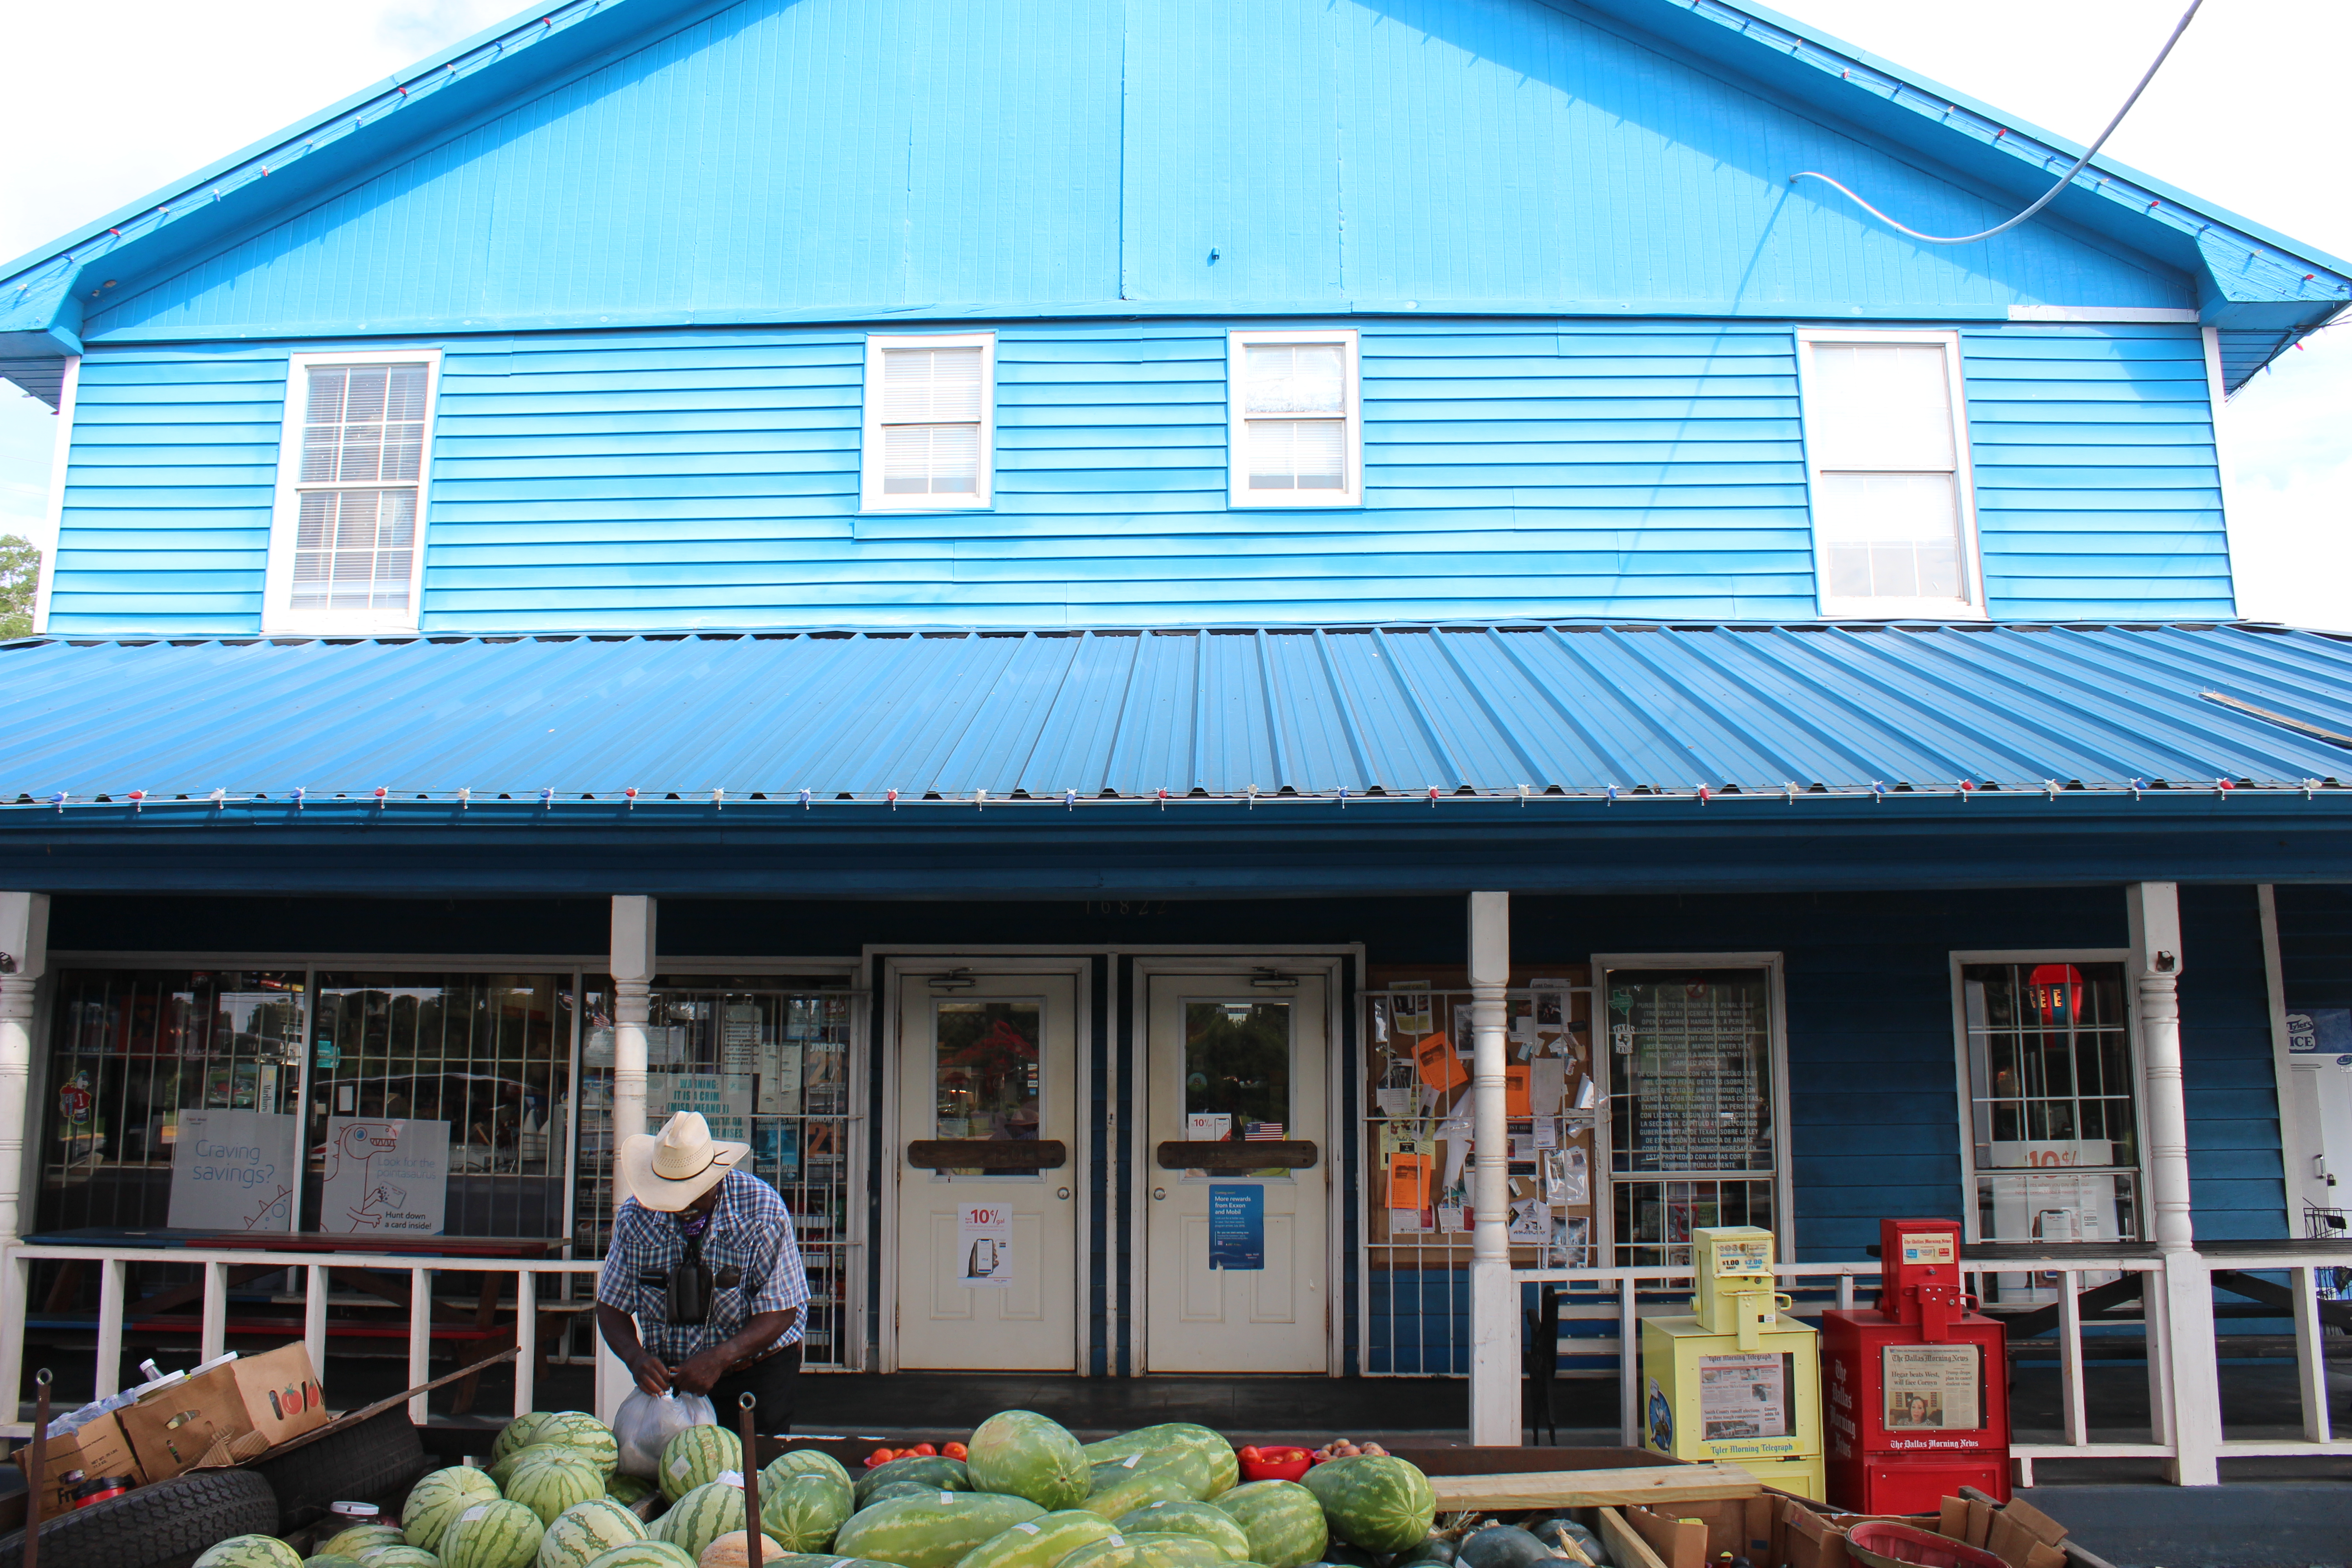 Herbert "Cowboy" Phillips stands outside of The Blue Store, alongside a large batch of watermelon.